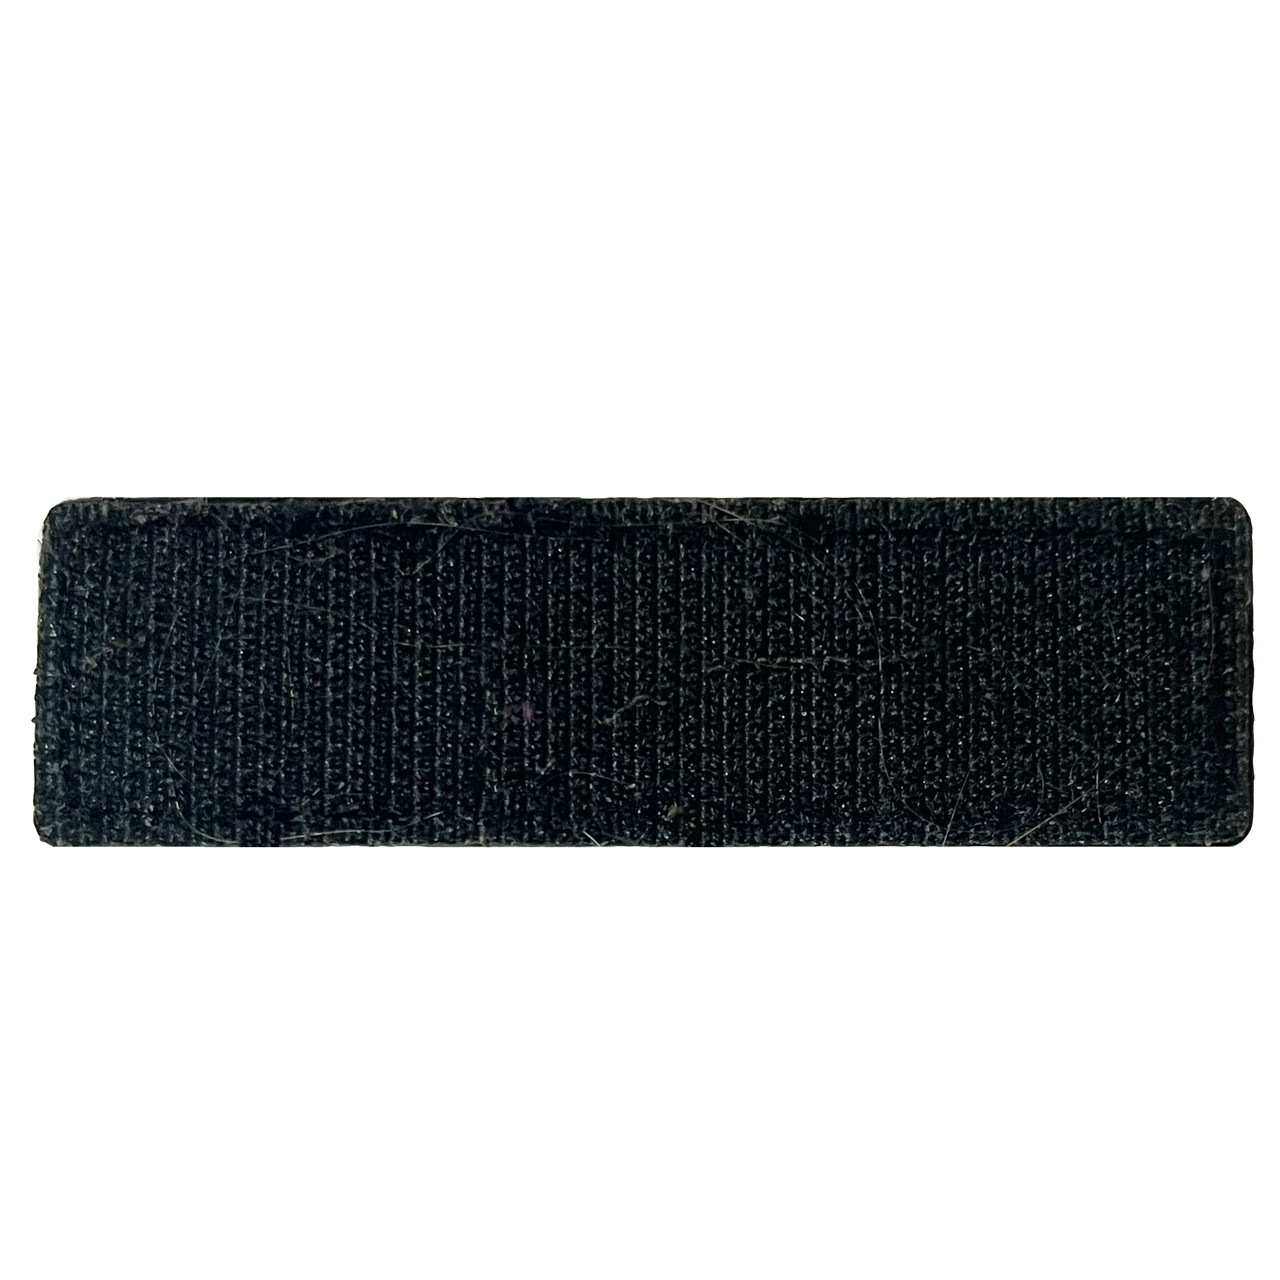 Rescue Essentials PVC Cross Patch, Velcro-Backed - Gray on Black